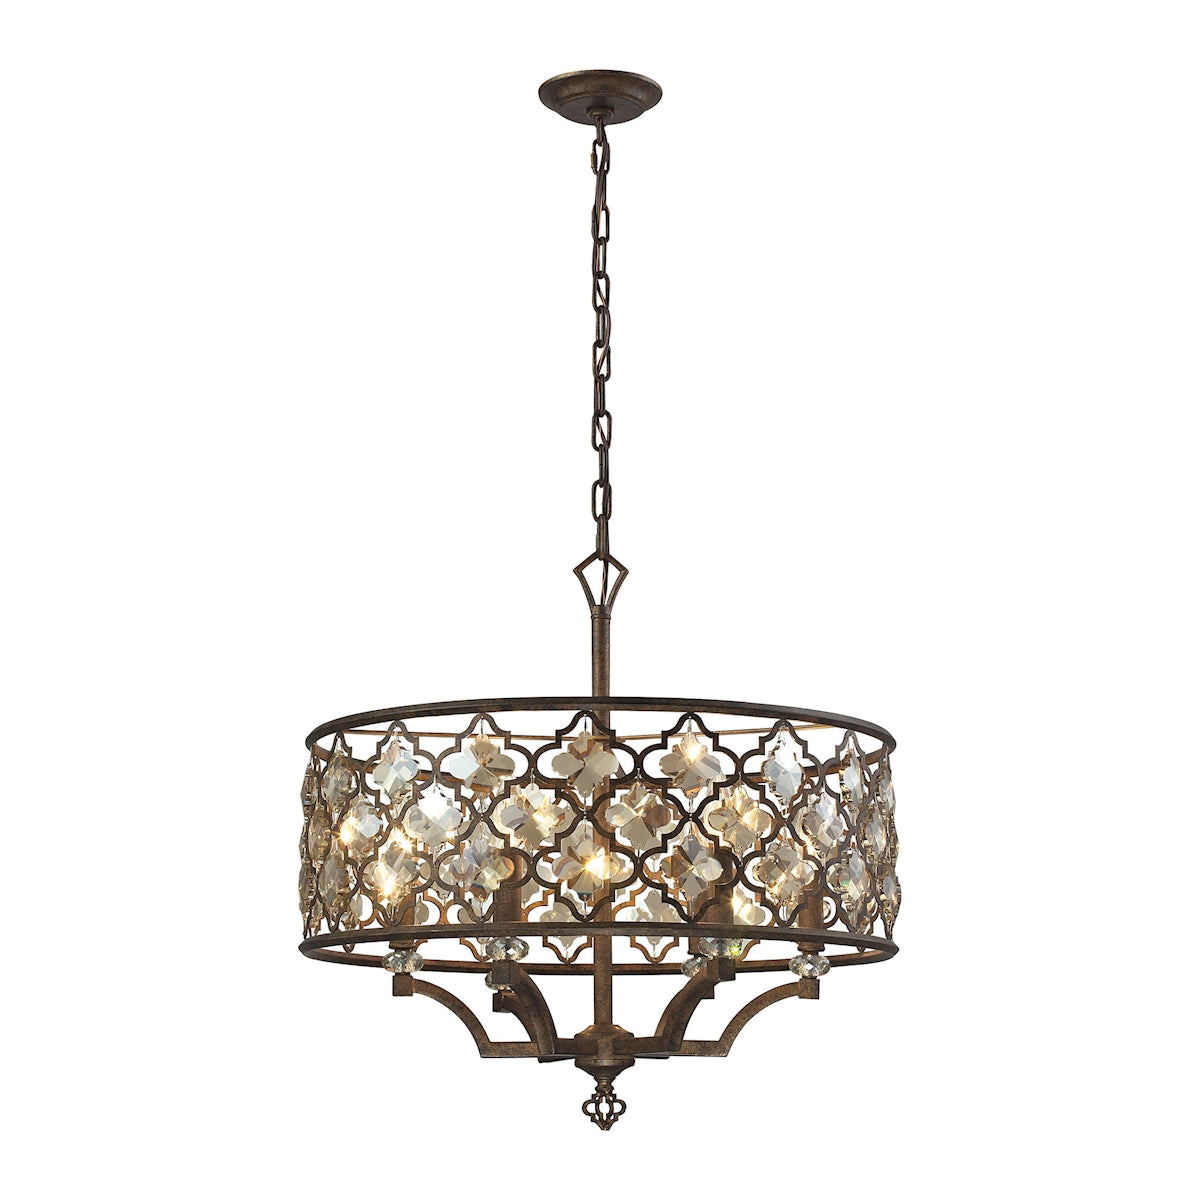 ELK Lighting 31097/6 Armand 6-Light Chandelier in Weathered Bronze with Amber Teak Crystals and Metal Shade